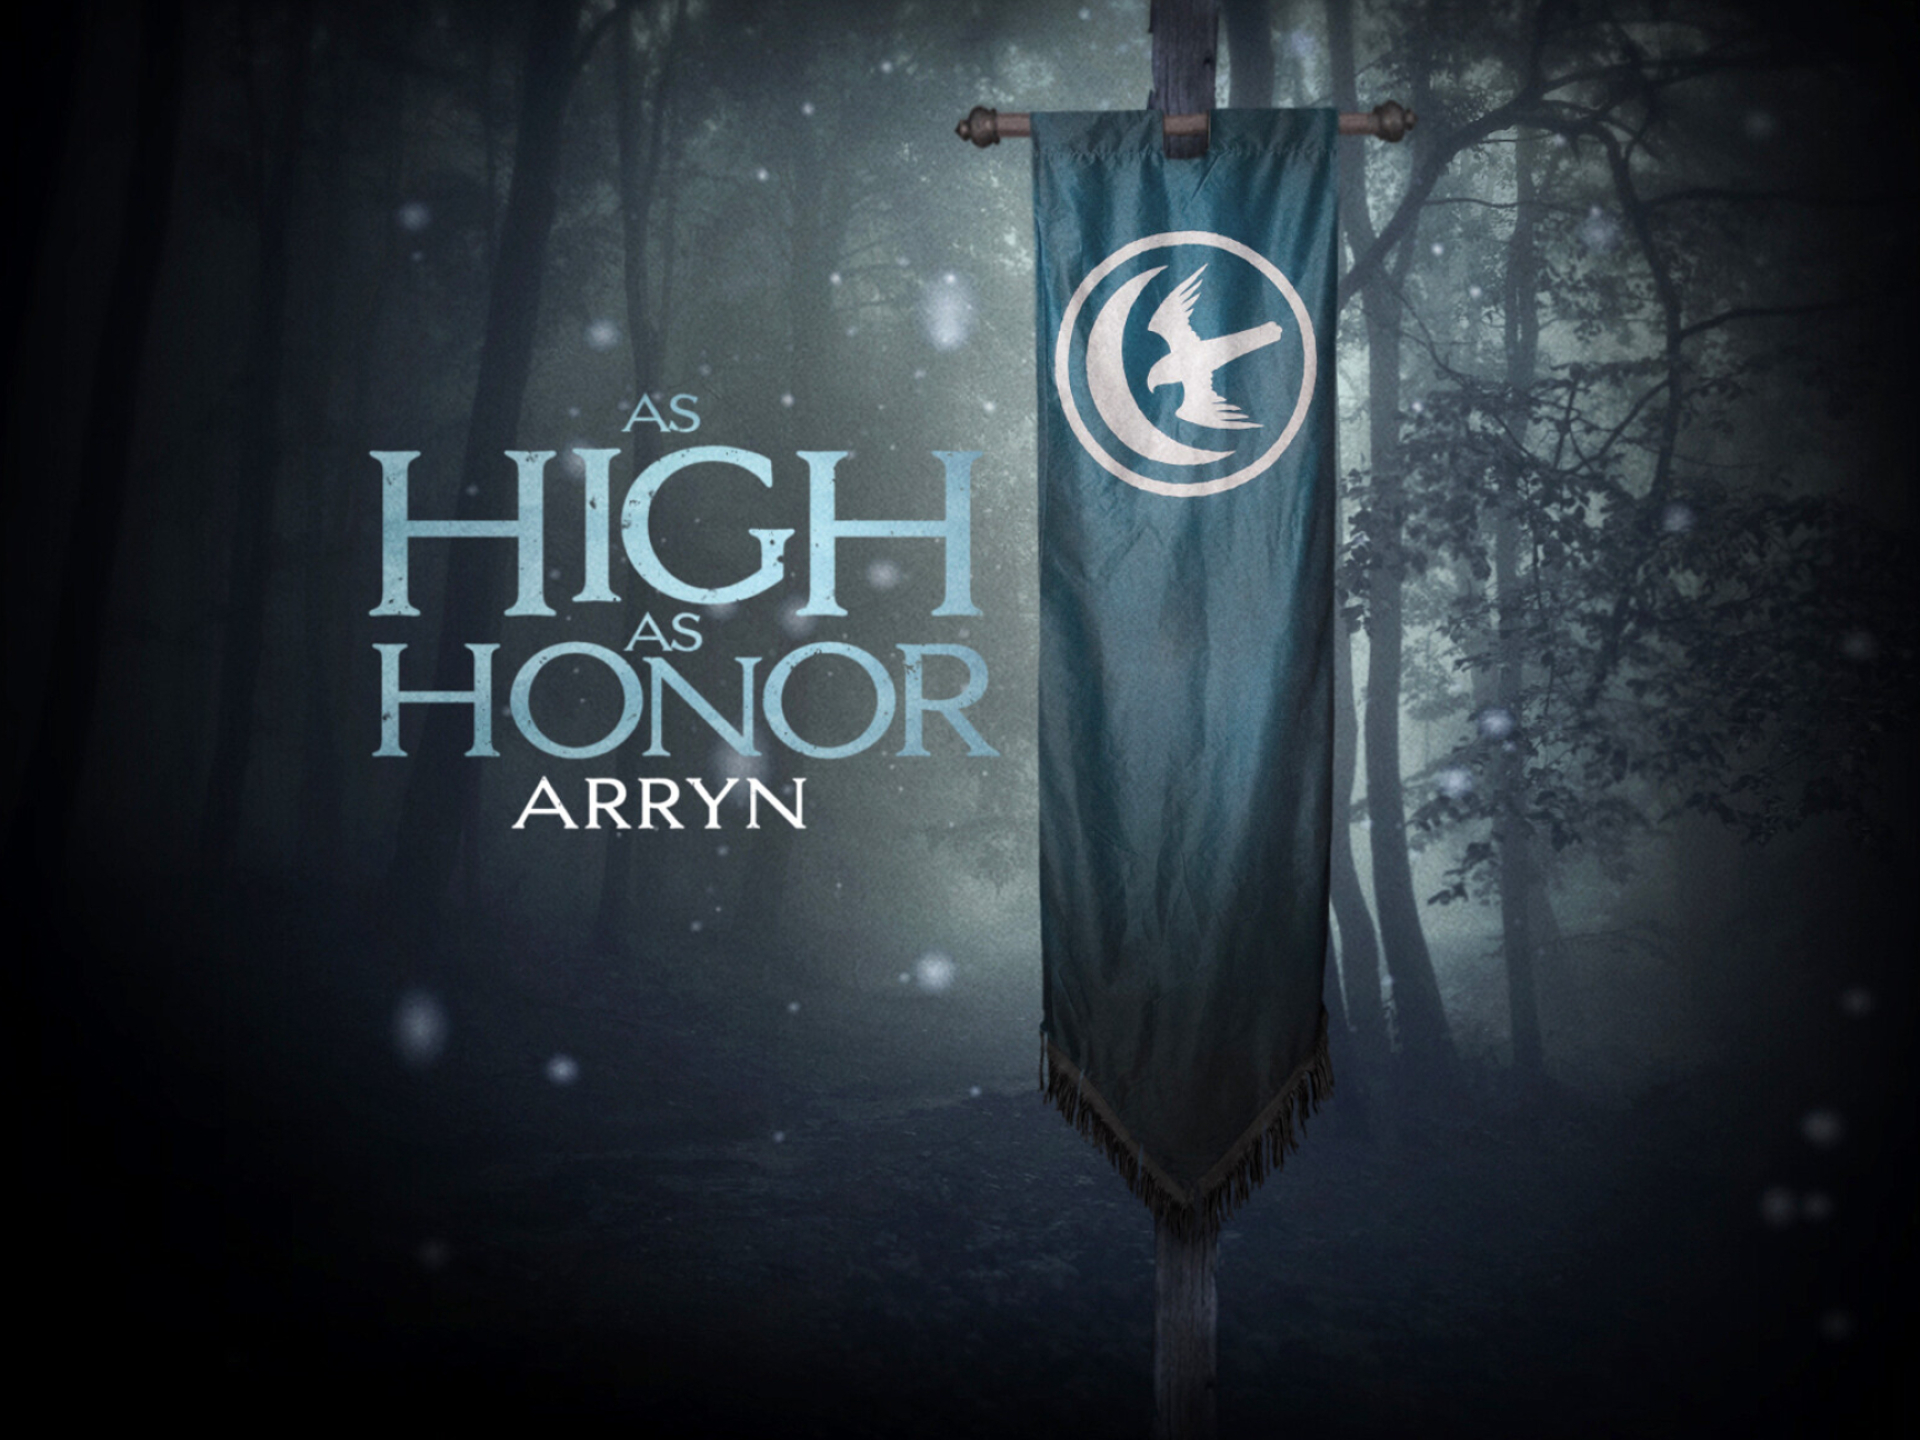 Game of Thrones: As high as honor, House Arryn, Westeros. 1920x1440 HD Wallpaper.